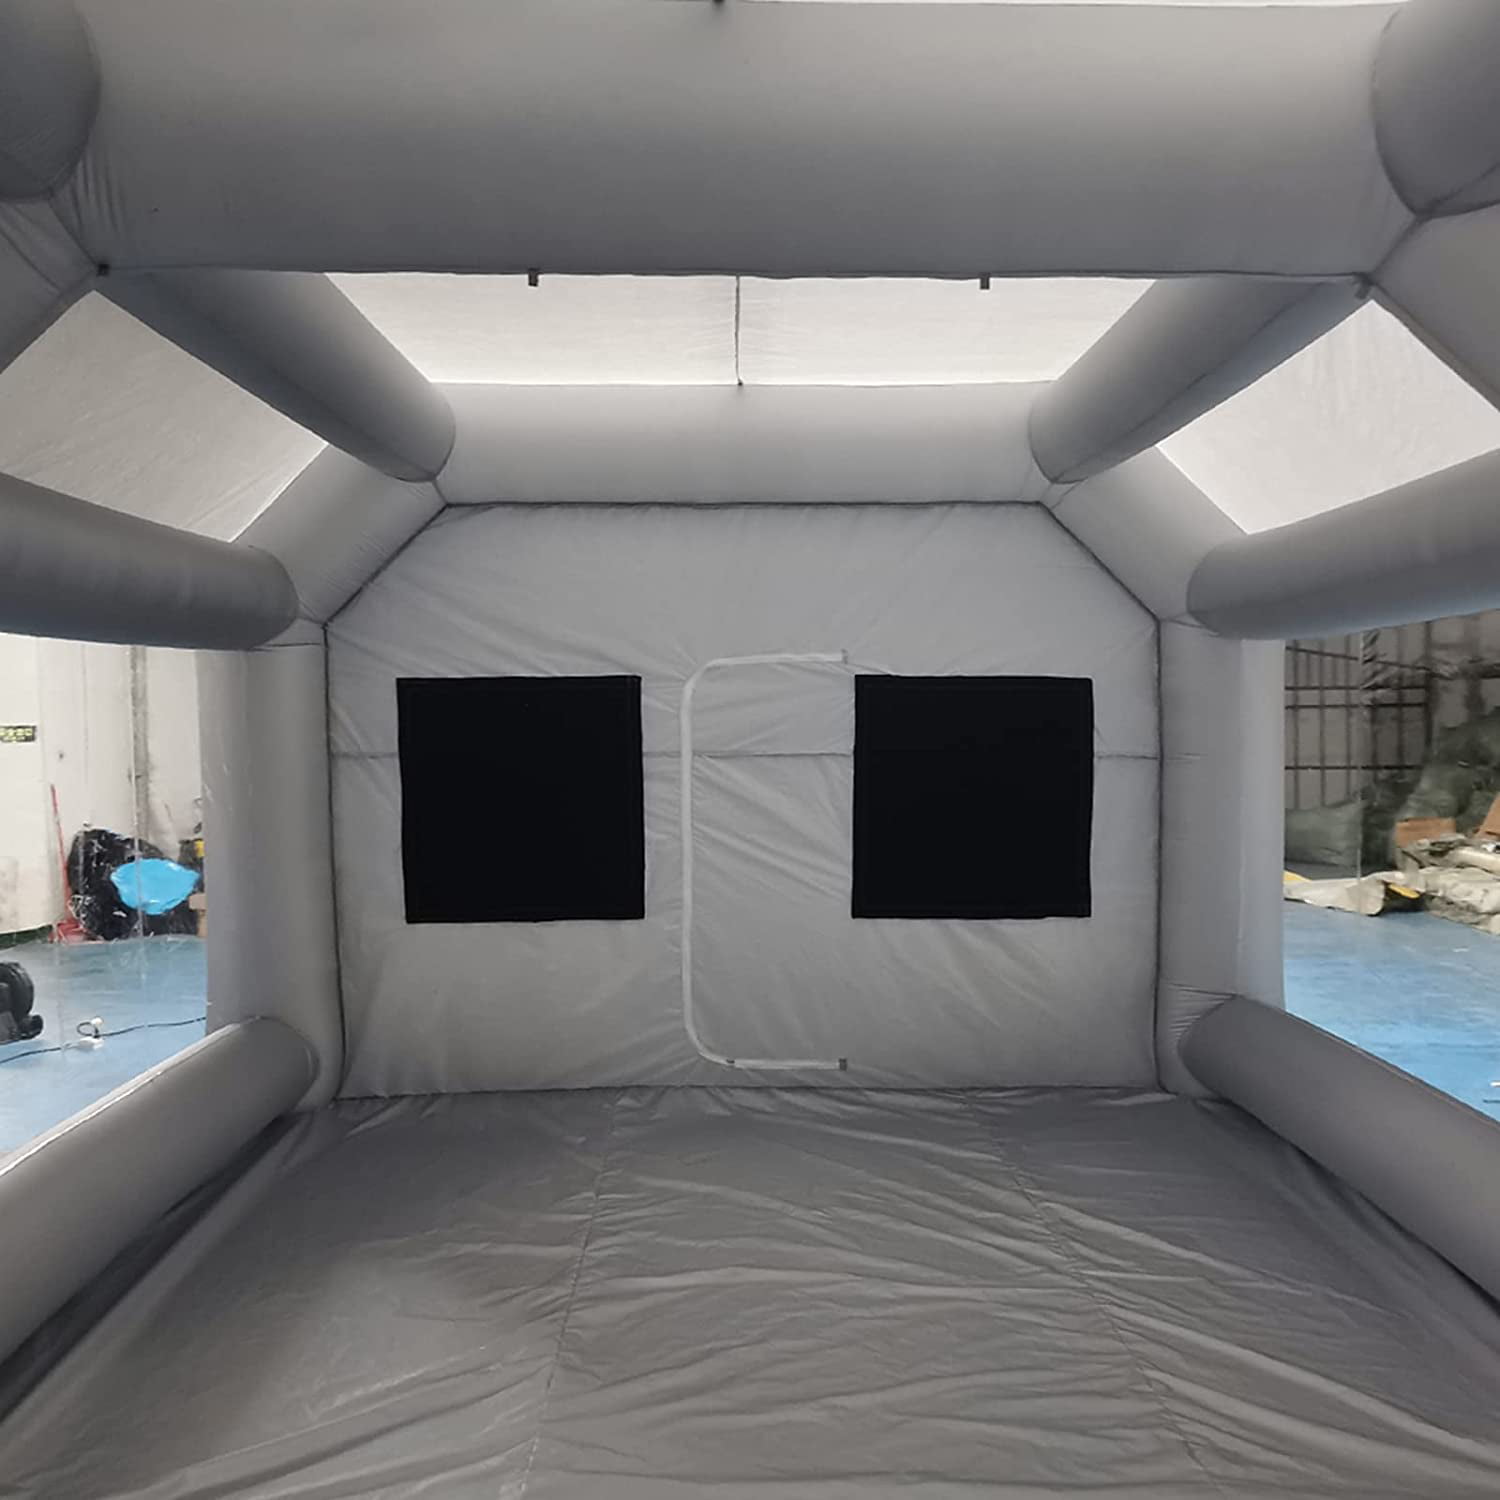 Outdoor Booth Spray Paint Booth Inflatable Booth Tents Portable Car Parking  Tent Workstation Wyz17600 - China Tent, Inflatable Tent